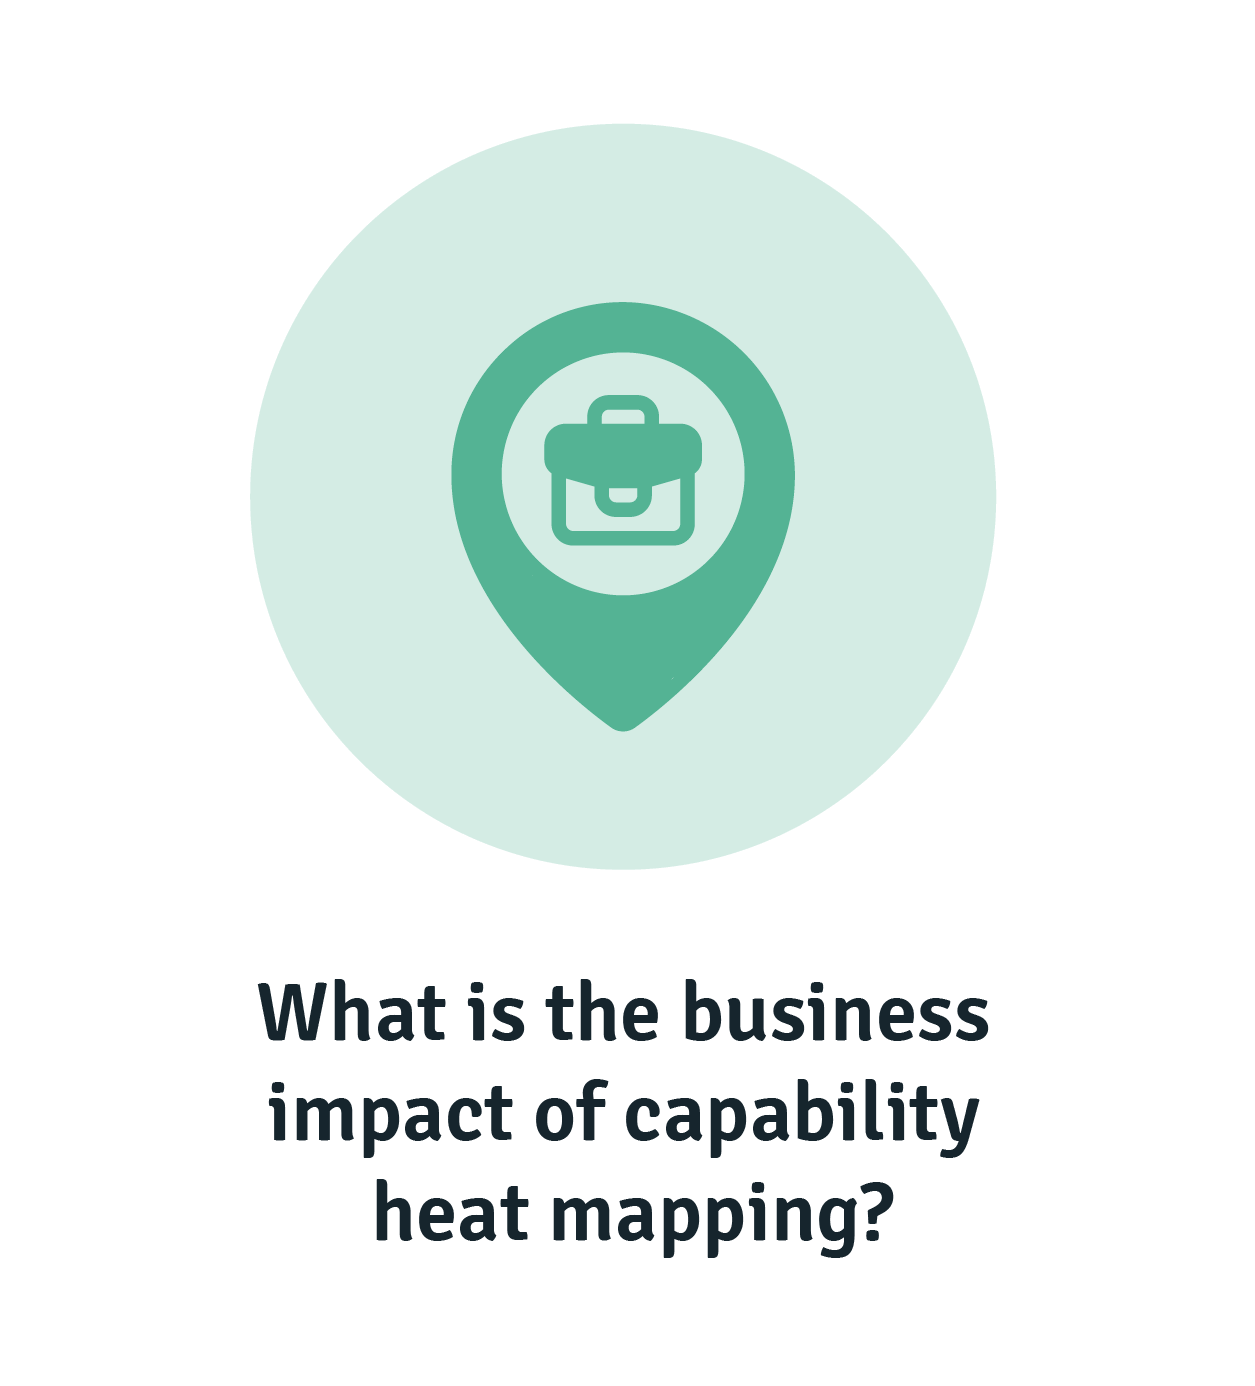 what is the business impact of capability heat mapping?